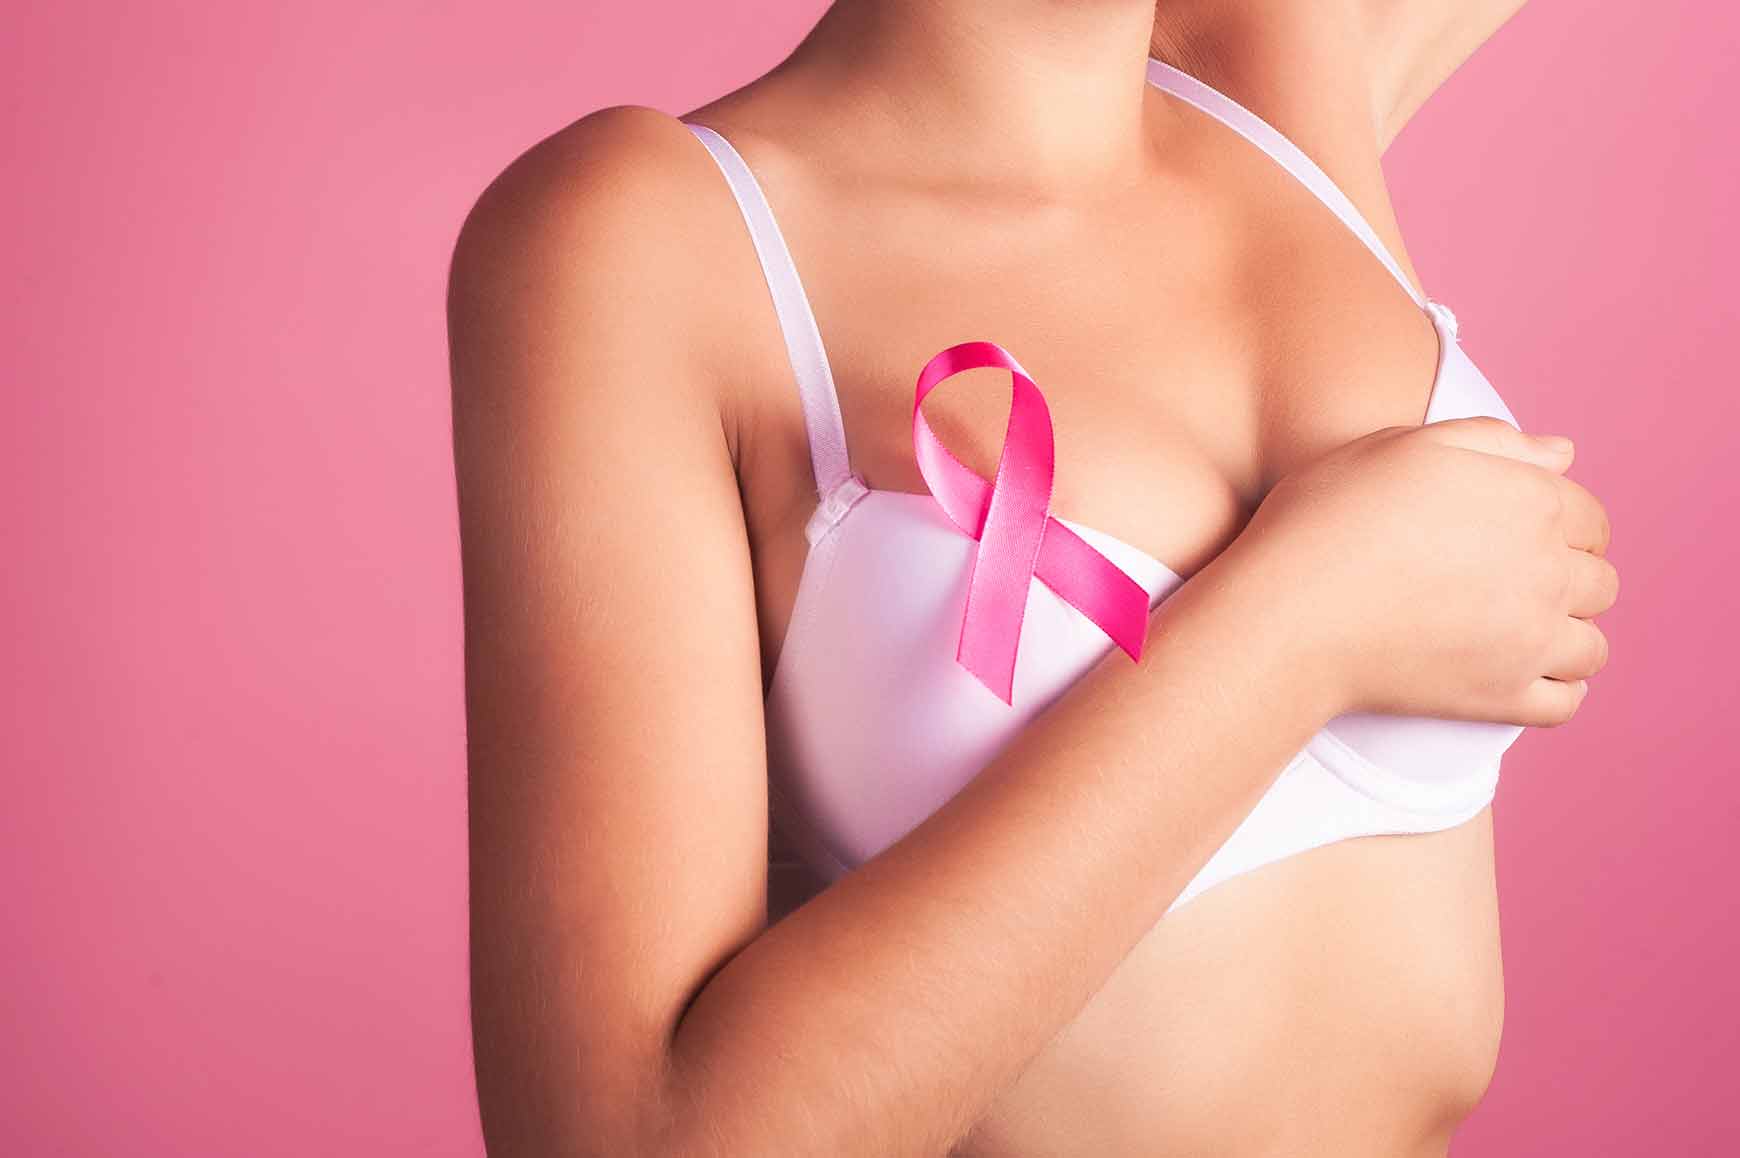 Breast reconstruction for breast cancer restores one or both breasts with the aim of normalizing size, appearance, symmetry, and shape.